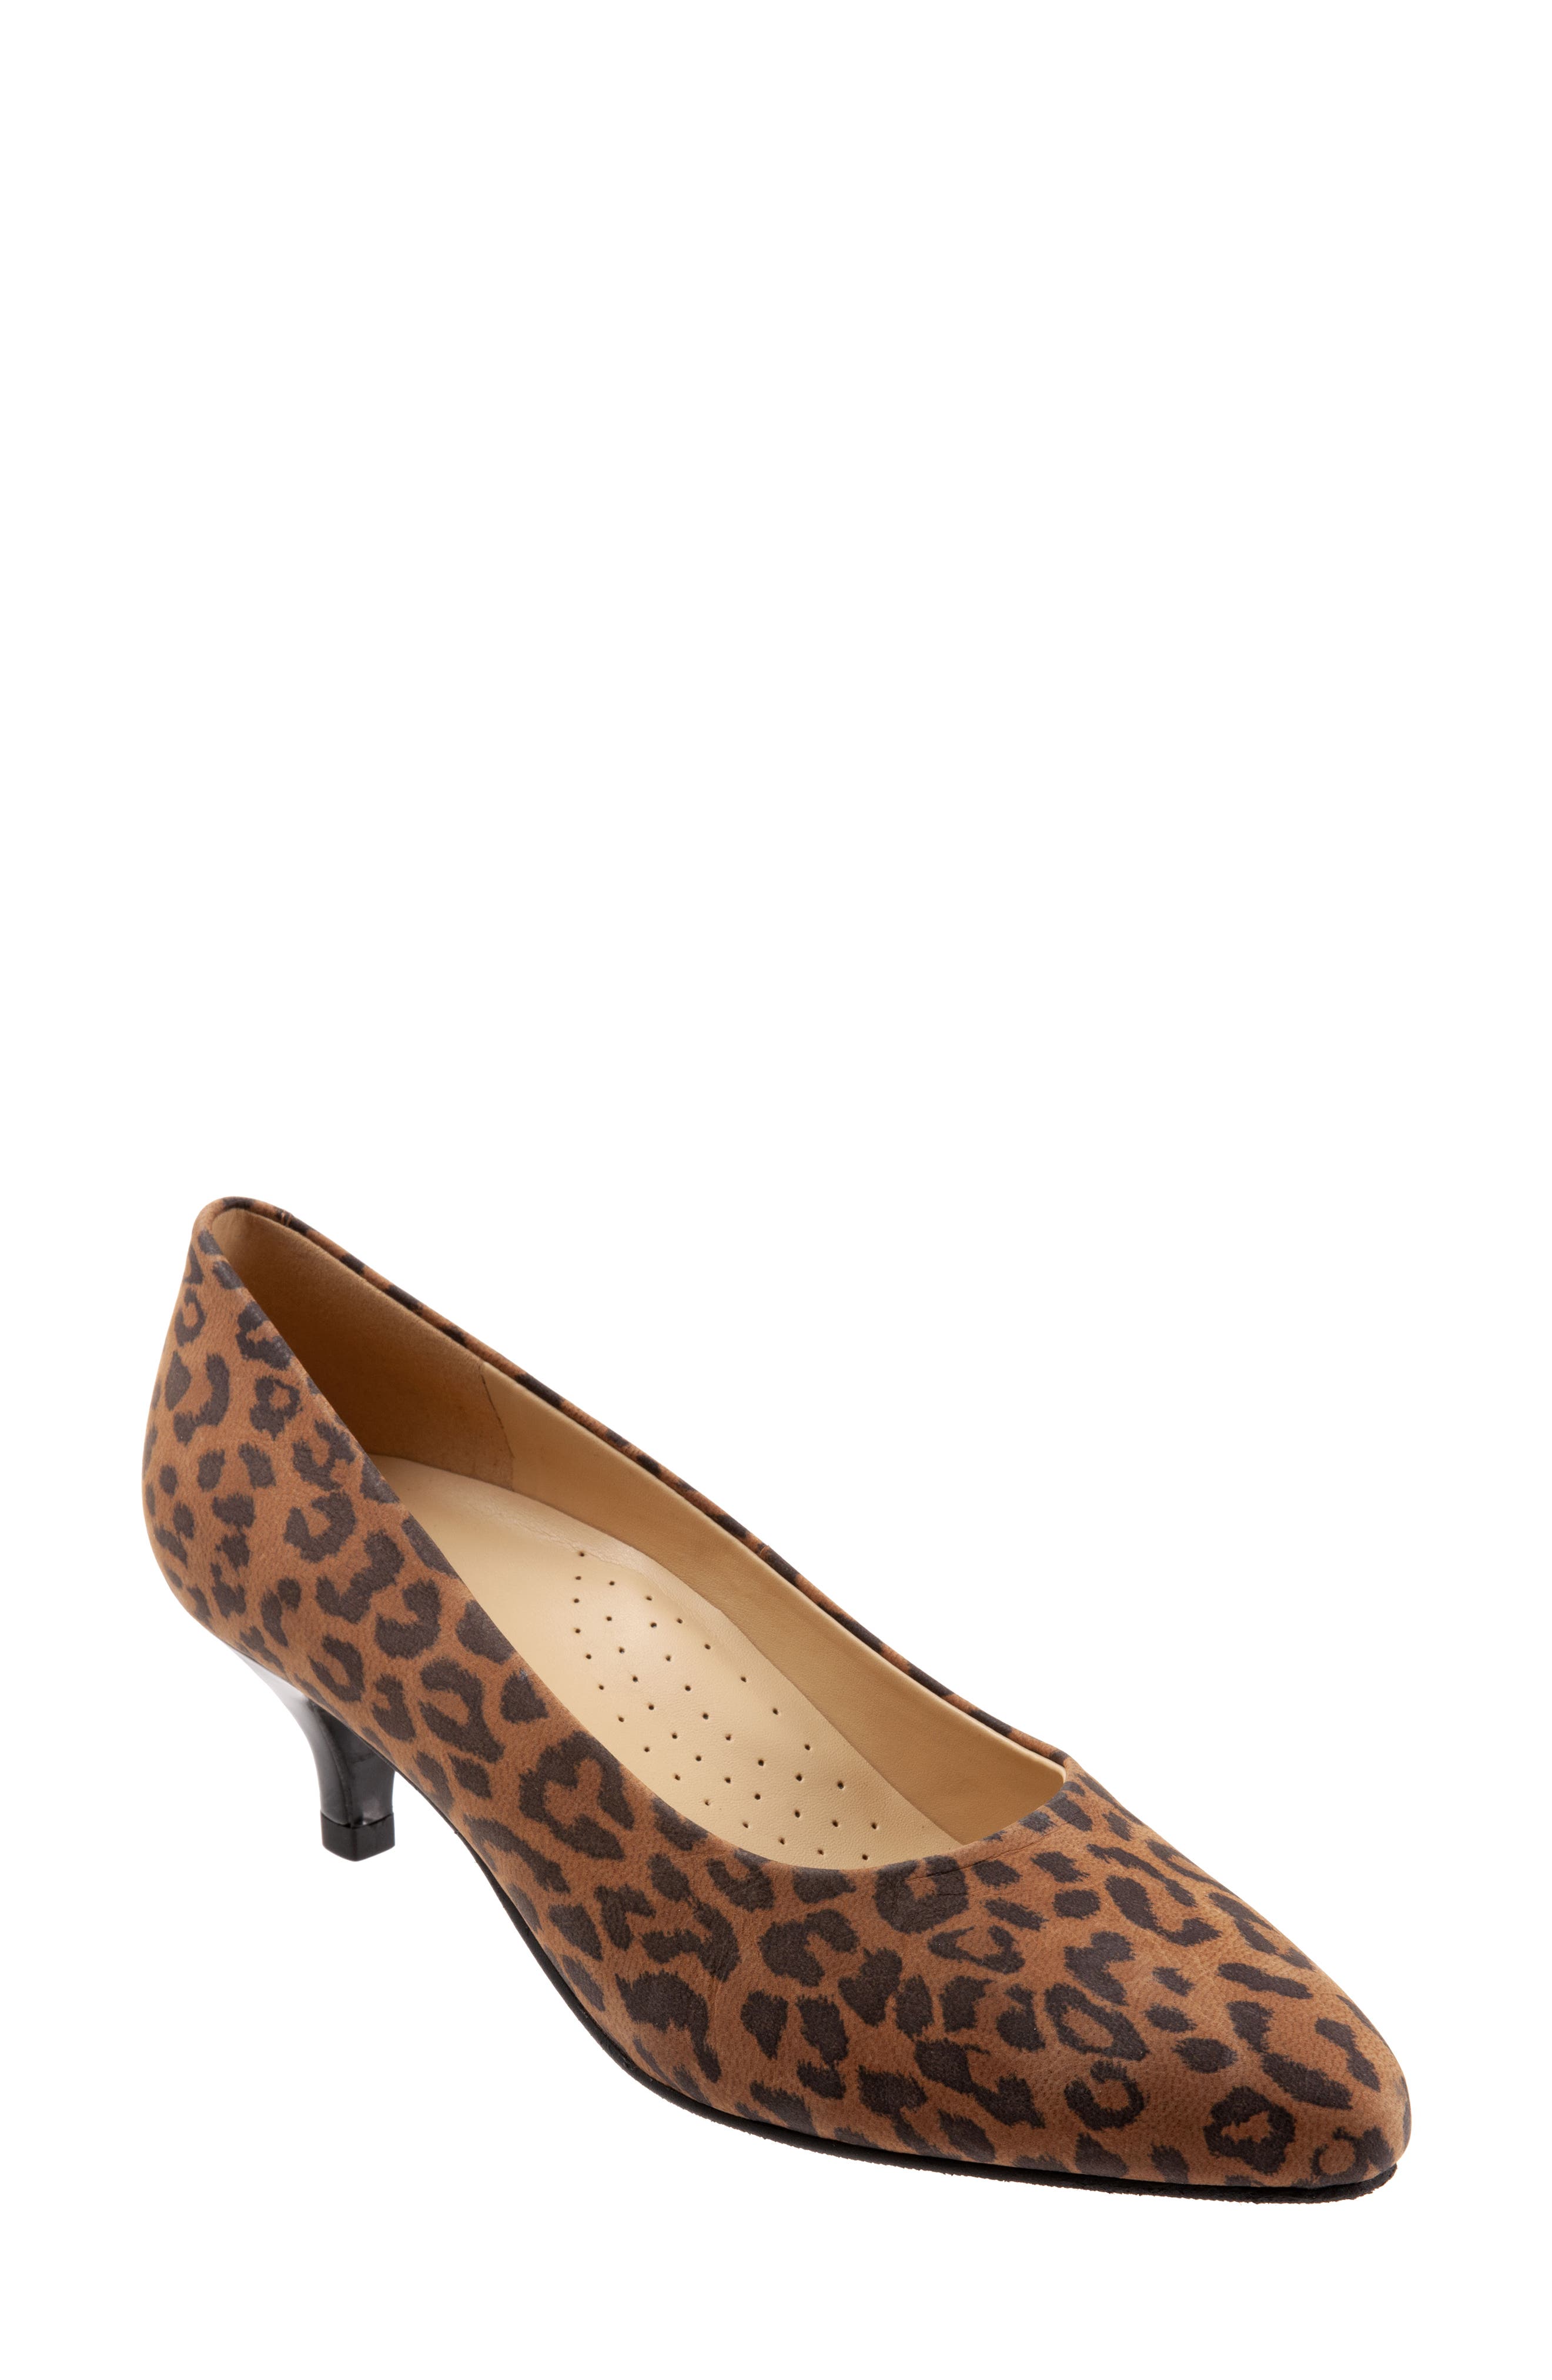 trotters candice pump